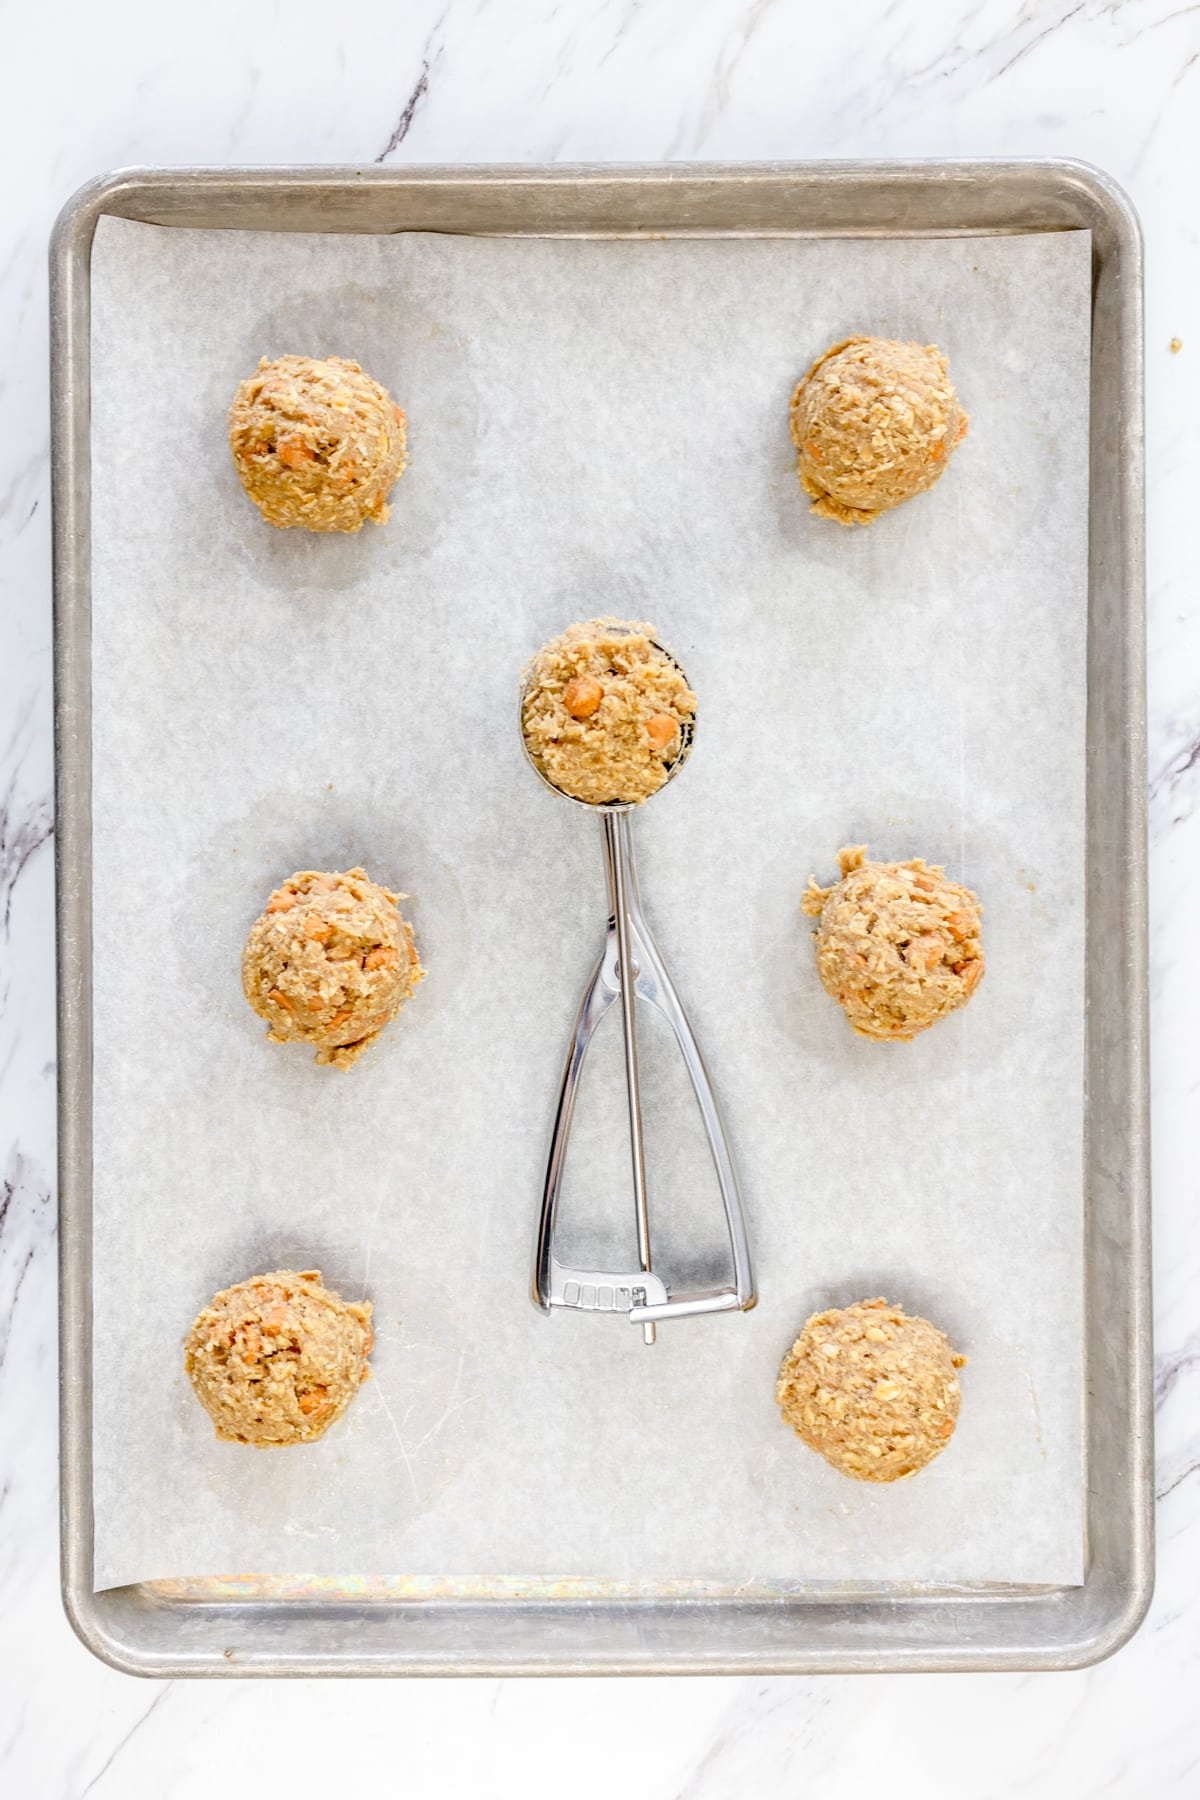 Top view of Oatmeal Butterscotch Cookie dough balls on a baking tray lined with parchment paper.